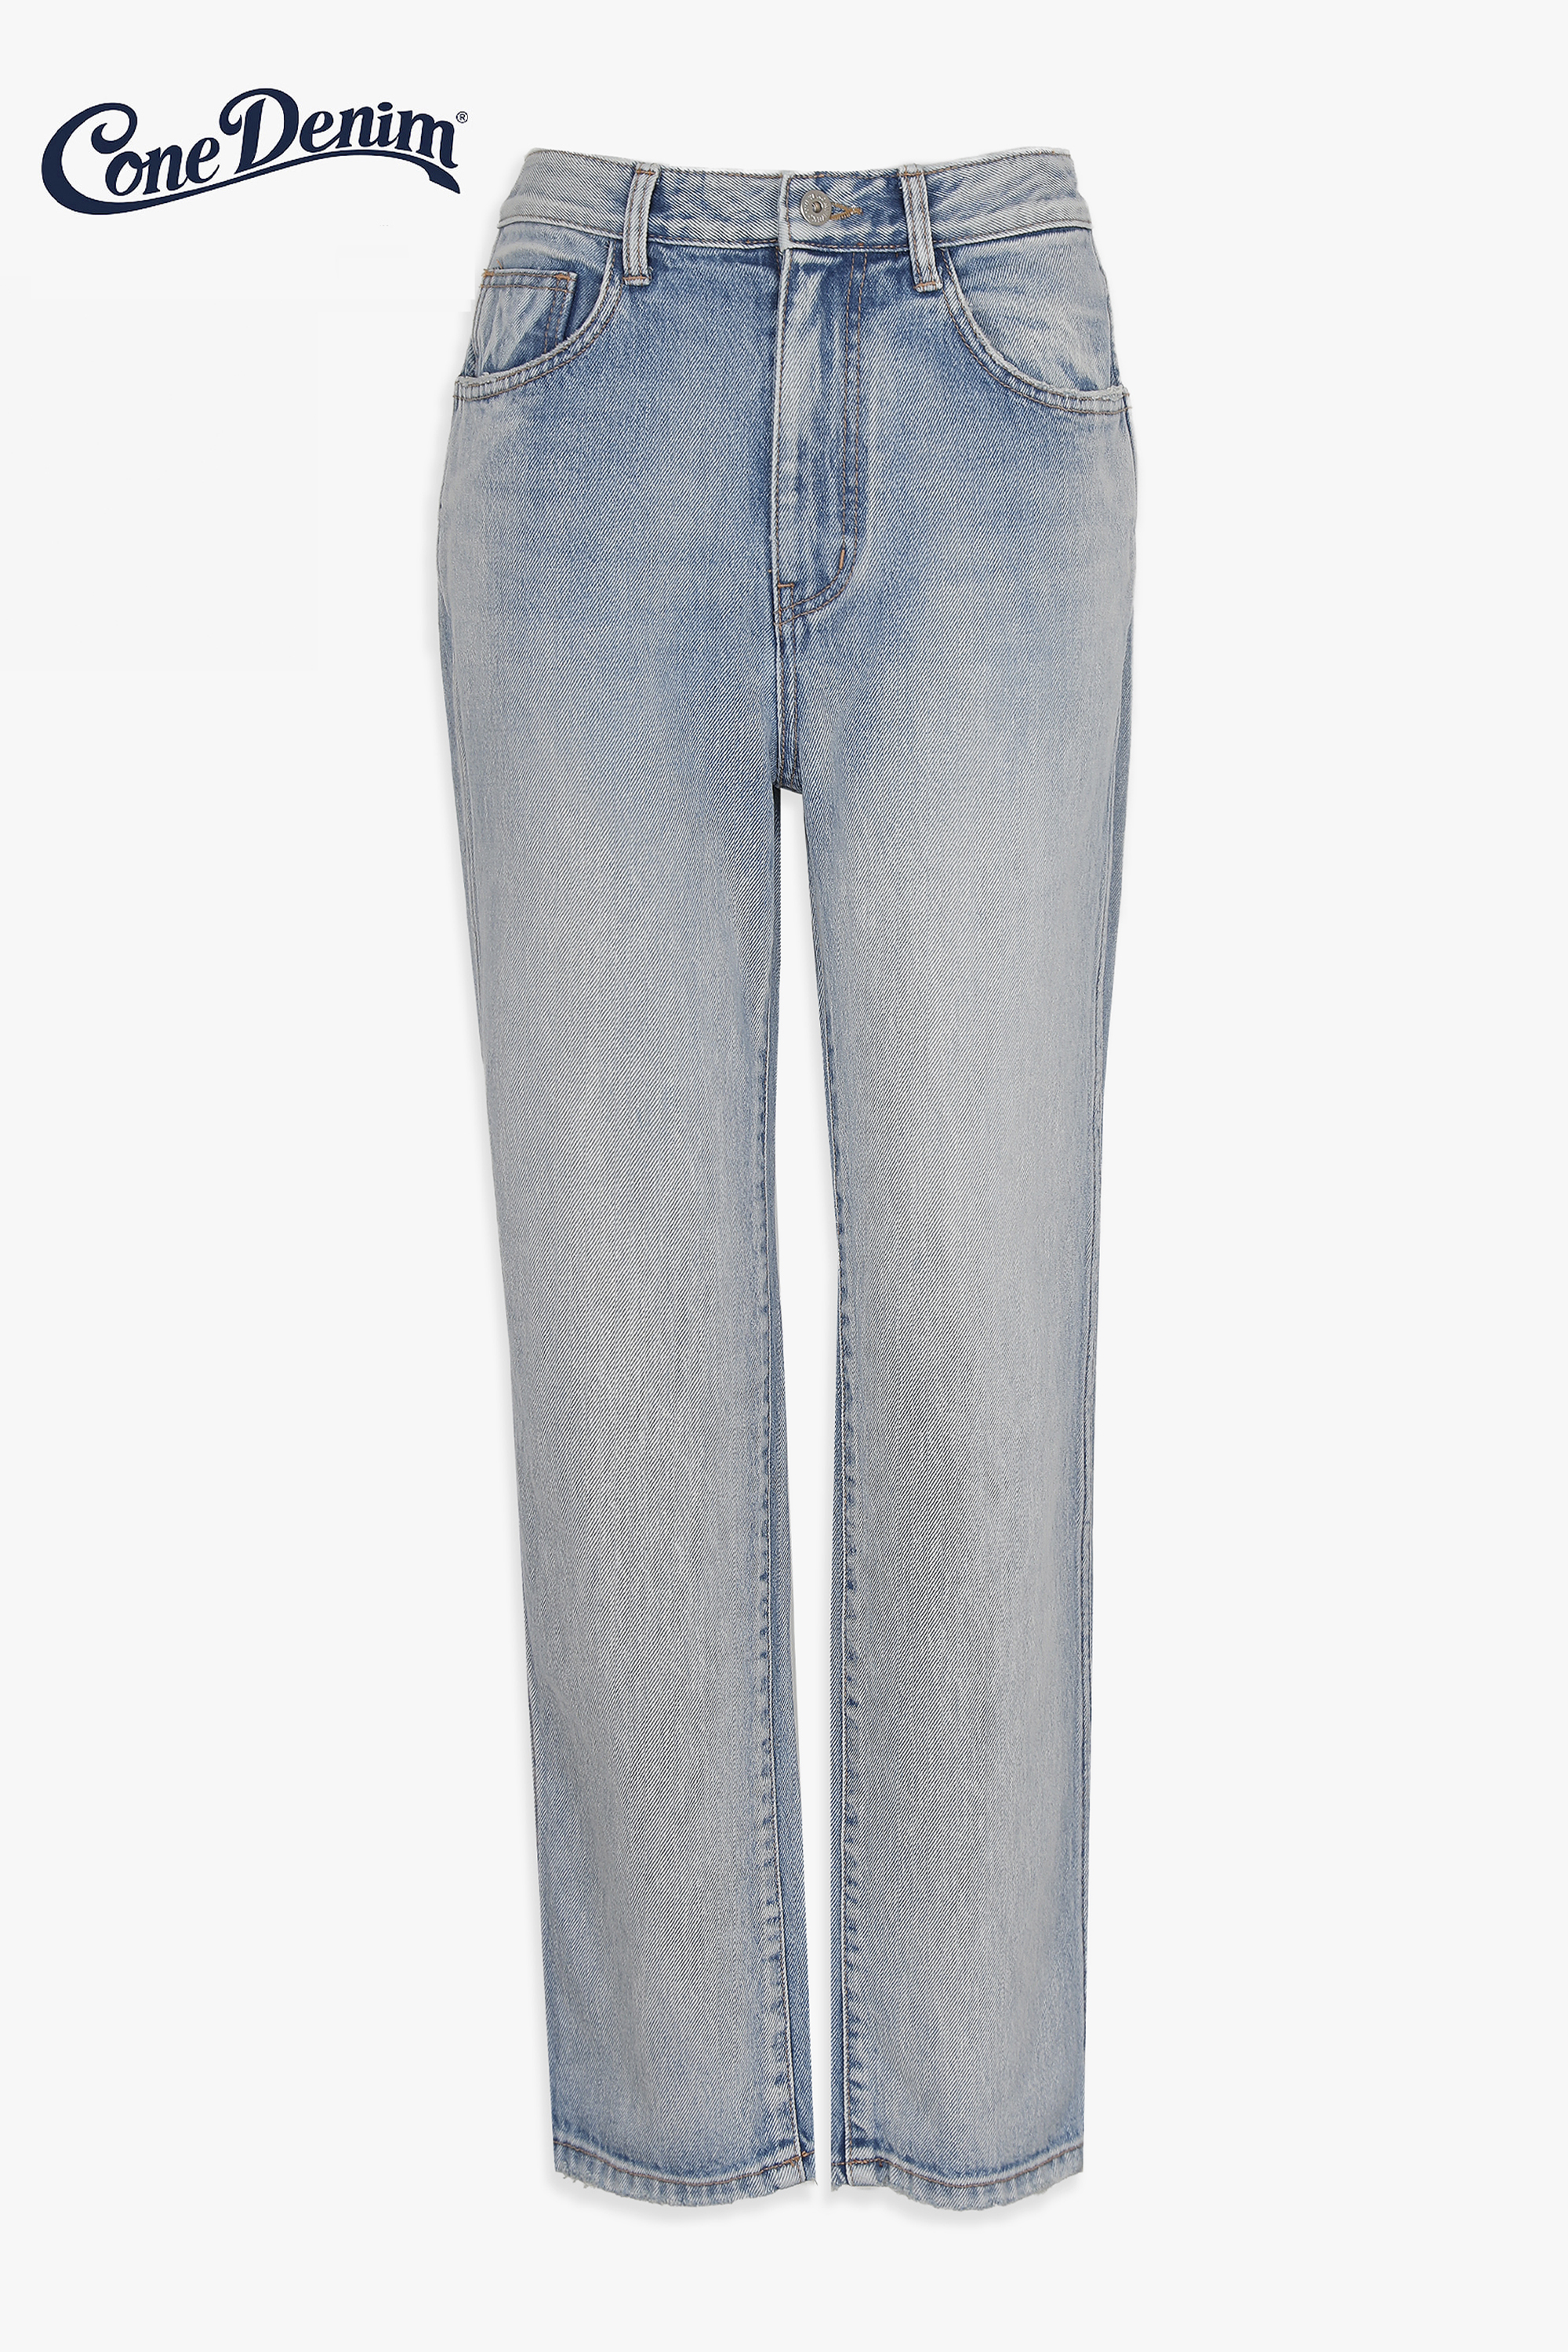 CROPPED STRAIGHT FIT. CONE DENIM (From U.S.A) LIGHT BLUE